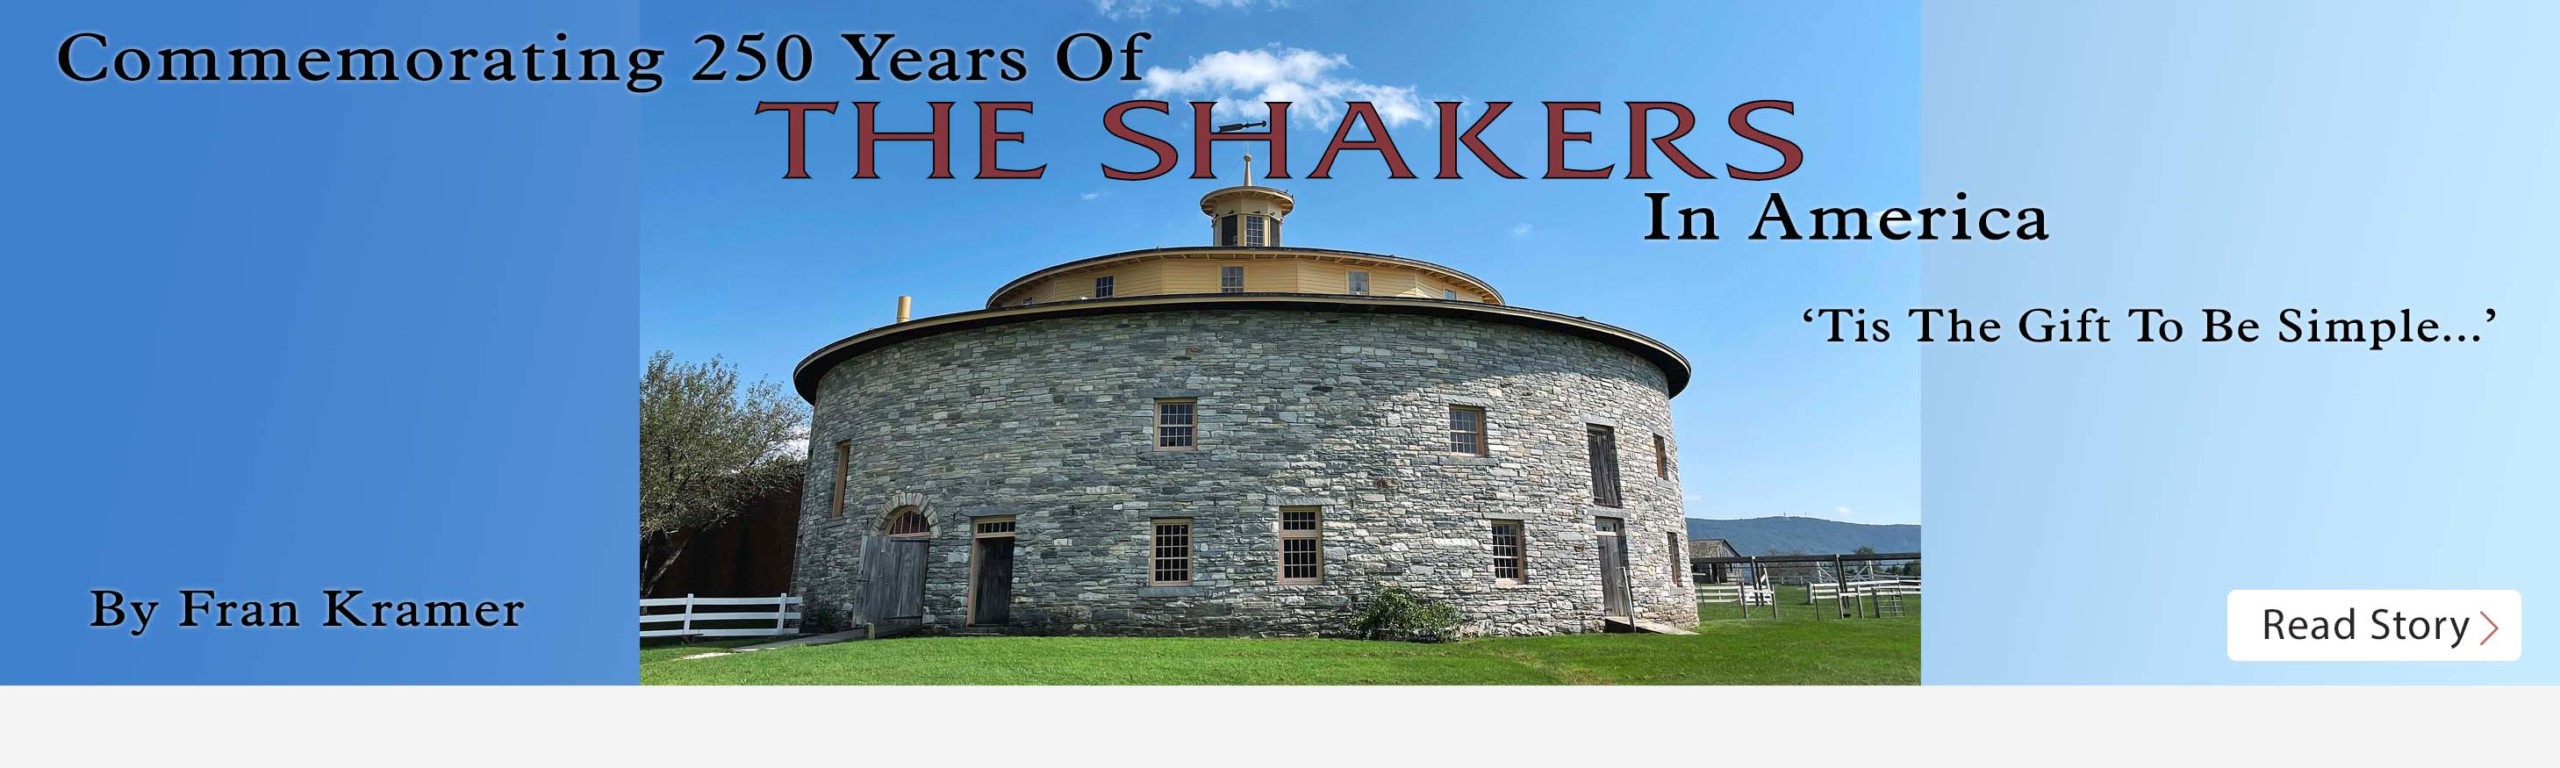 Commemorating 250 Years Of The Shakers In America —‘Tis The Gift To Be Simple…’